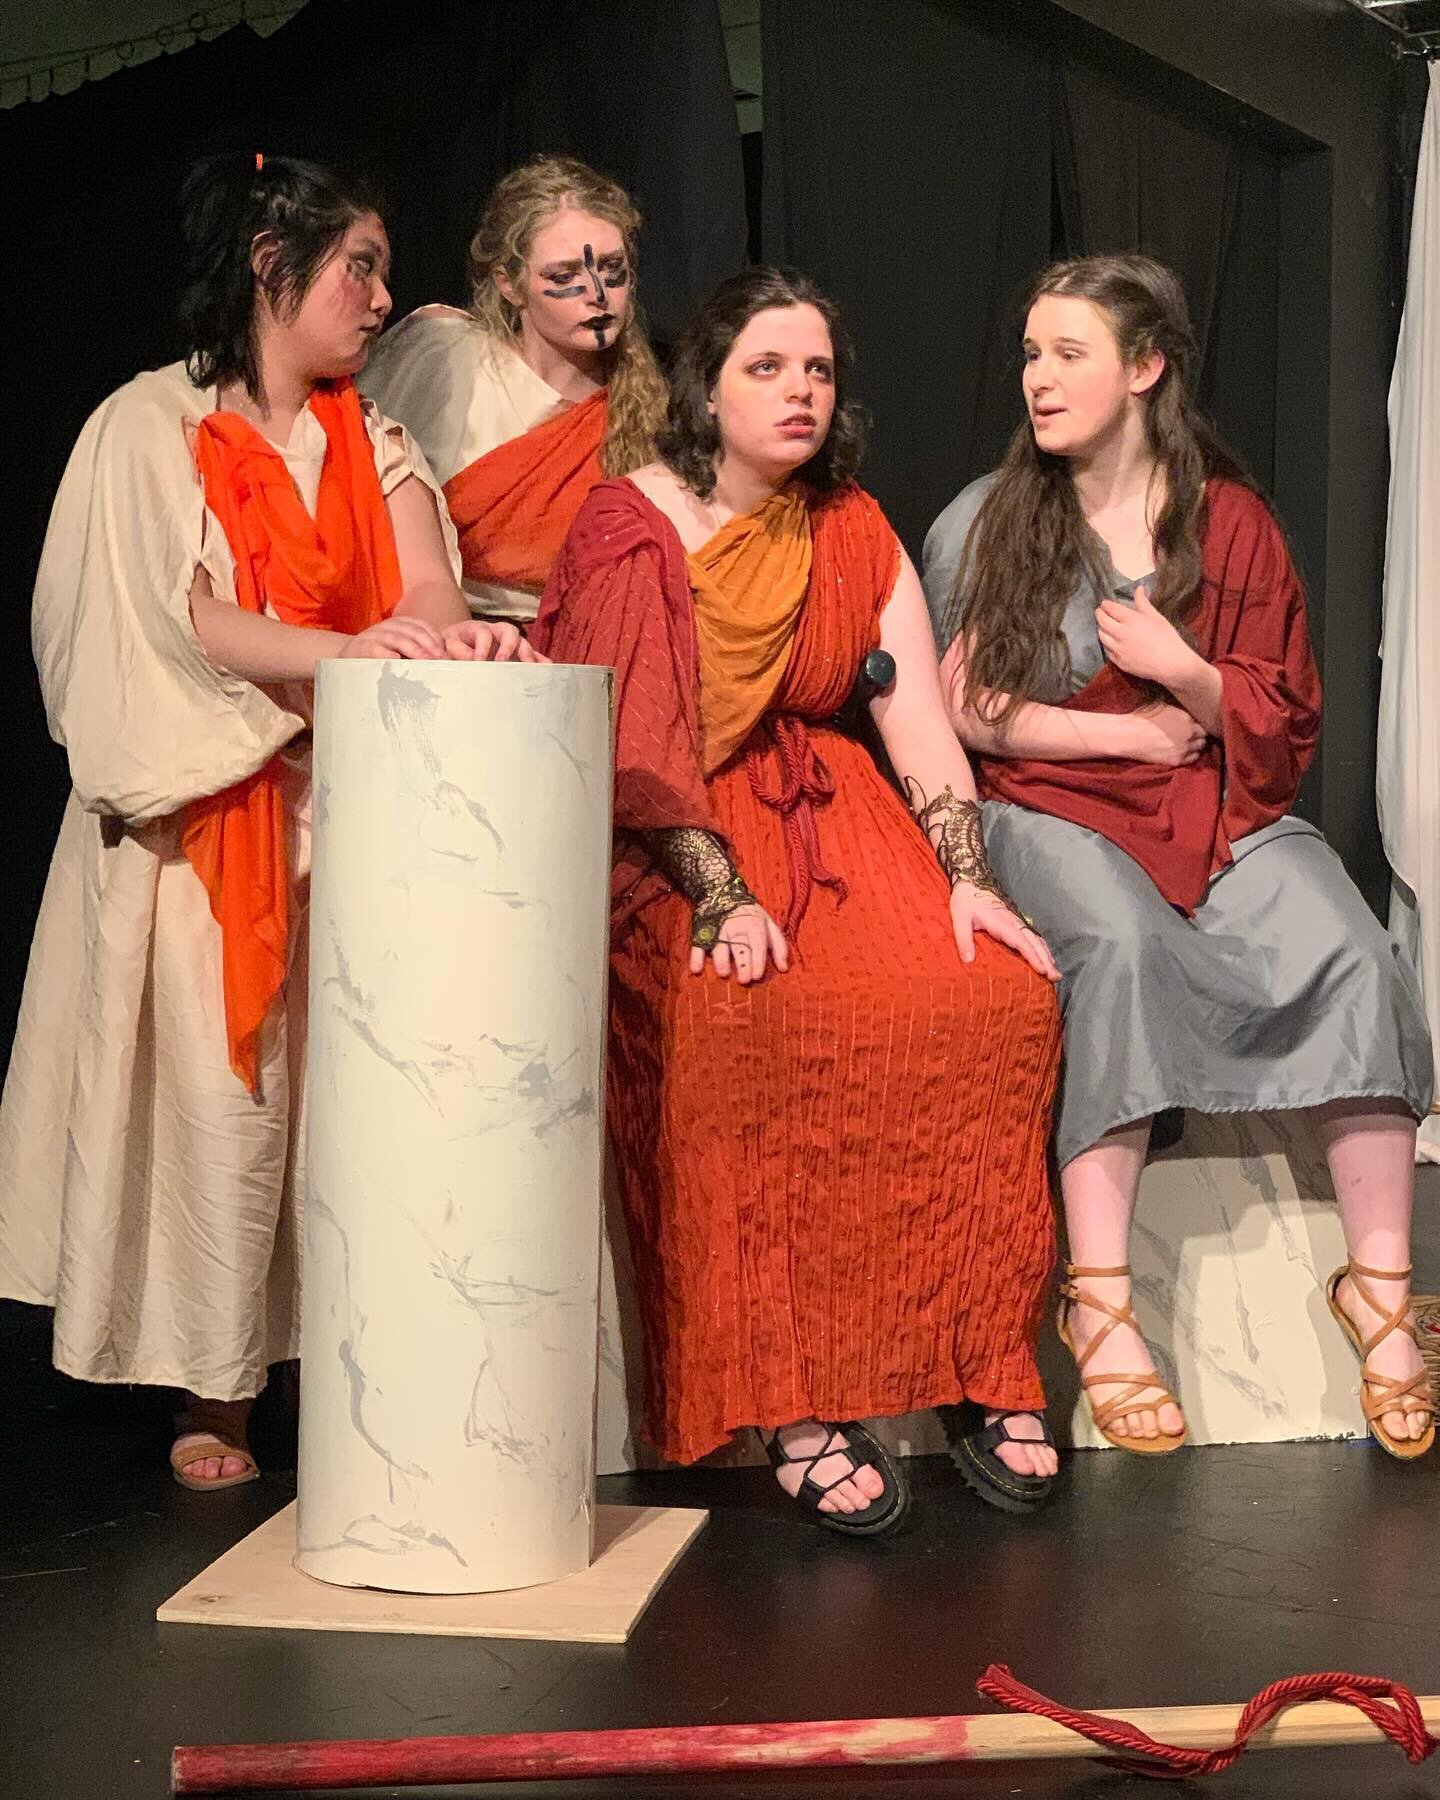 Dramafest Dress Rehearsal for MEDEA! 🎭 An incredible performance by cast and crew! #drama #dramafestival #medea #theater #acting #highschool #performingarts